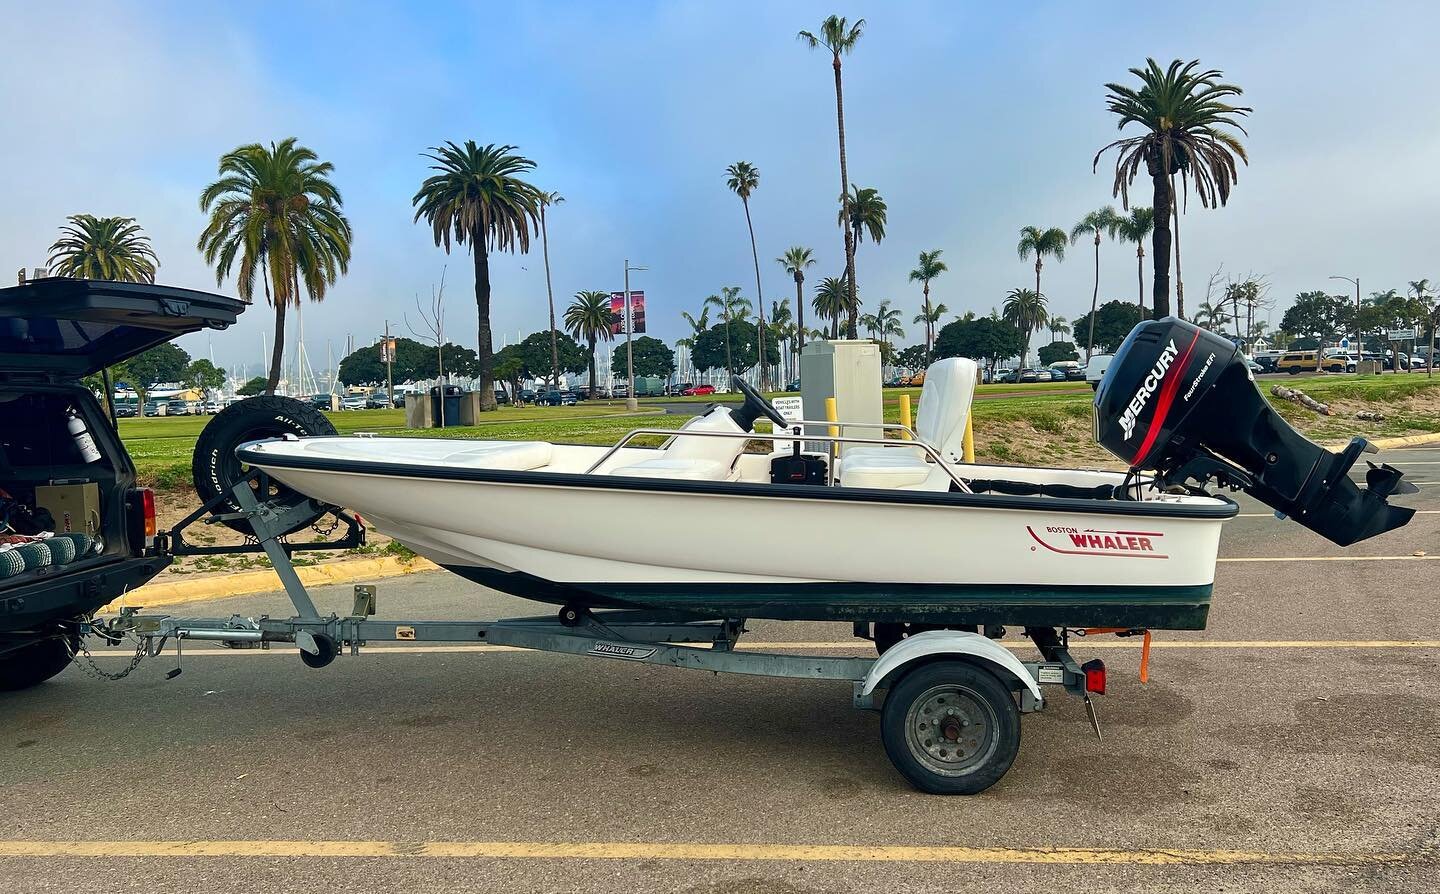 My new toy! Picked up this Boston Whaler last night to add to my fleet.  Will be a very fun addition. #bostonwhaler #whaler #fun #boat #boatlife #boating #power #happy #happiness #yacht #yachting #yachtlife #freedom #toys #boats #adventure #water #oc